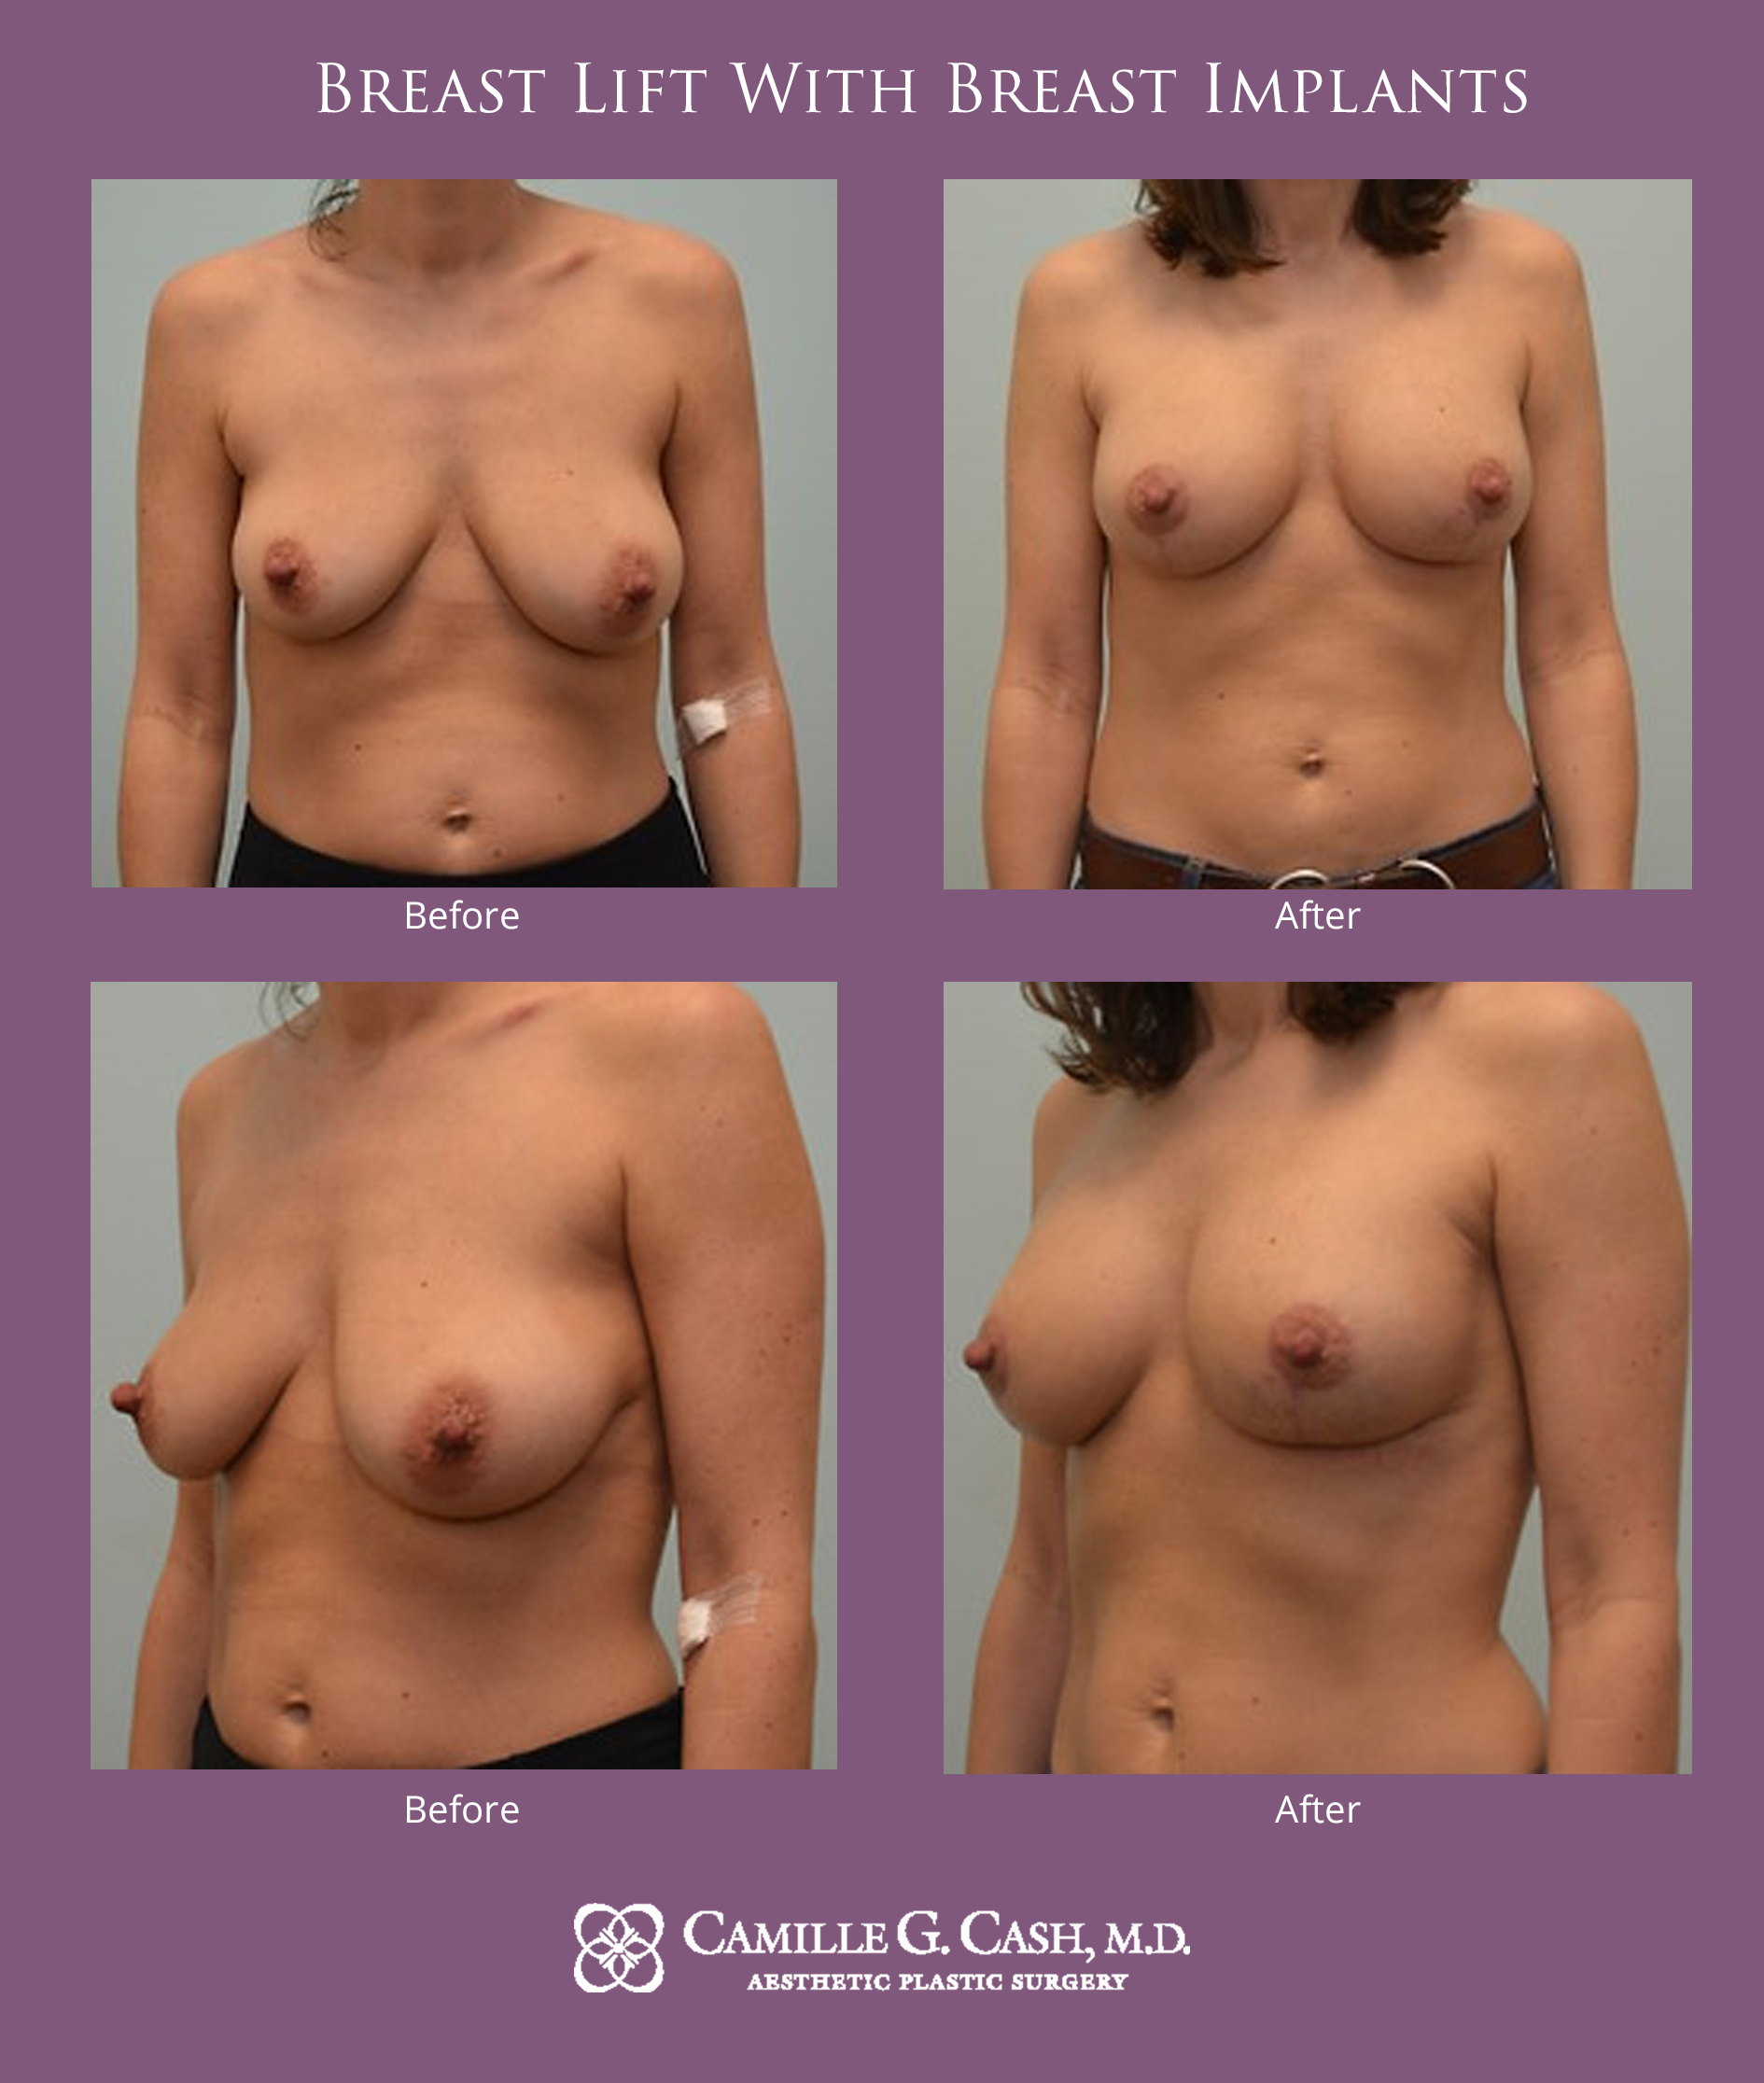 Breast lift with implants before and after photos